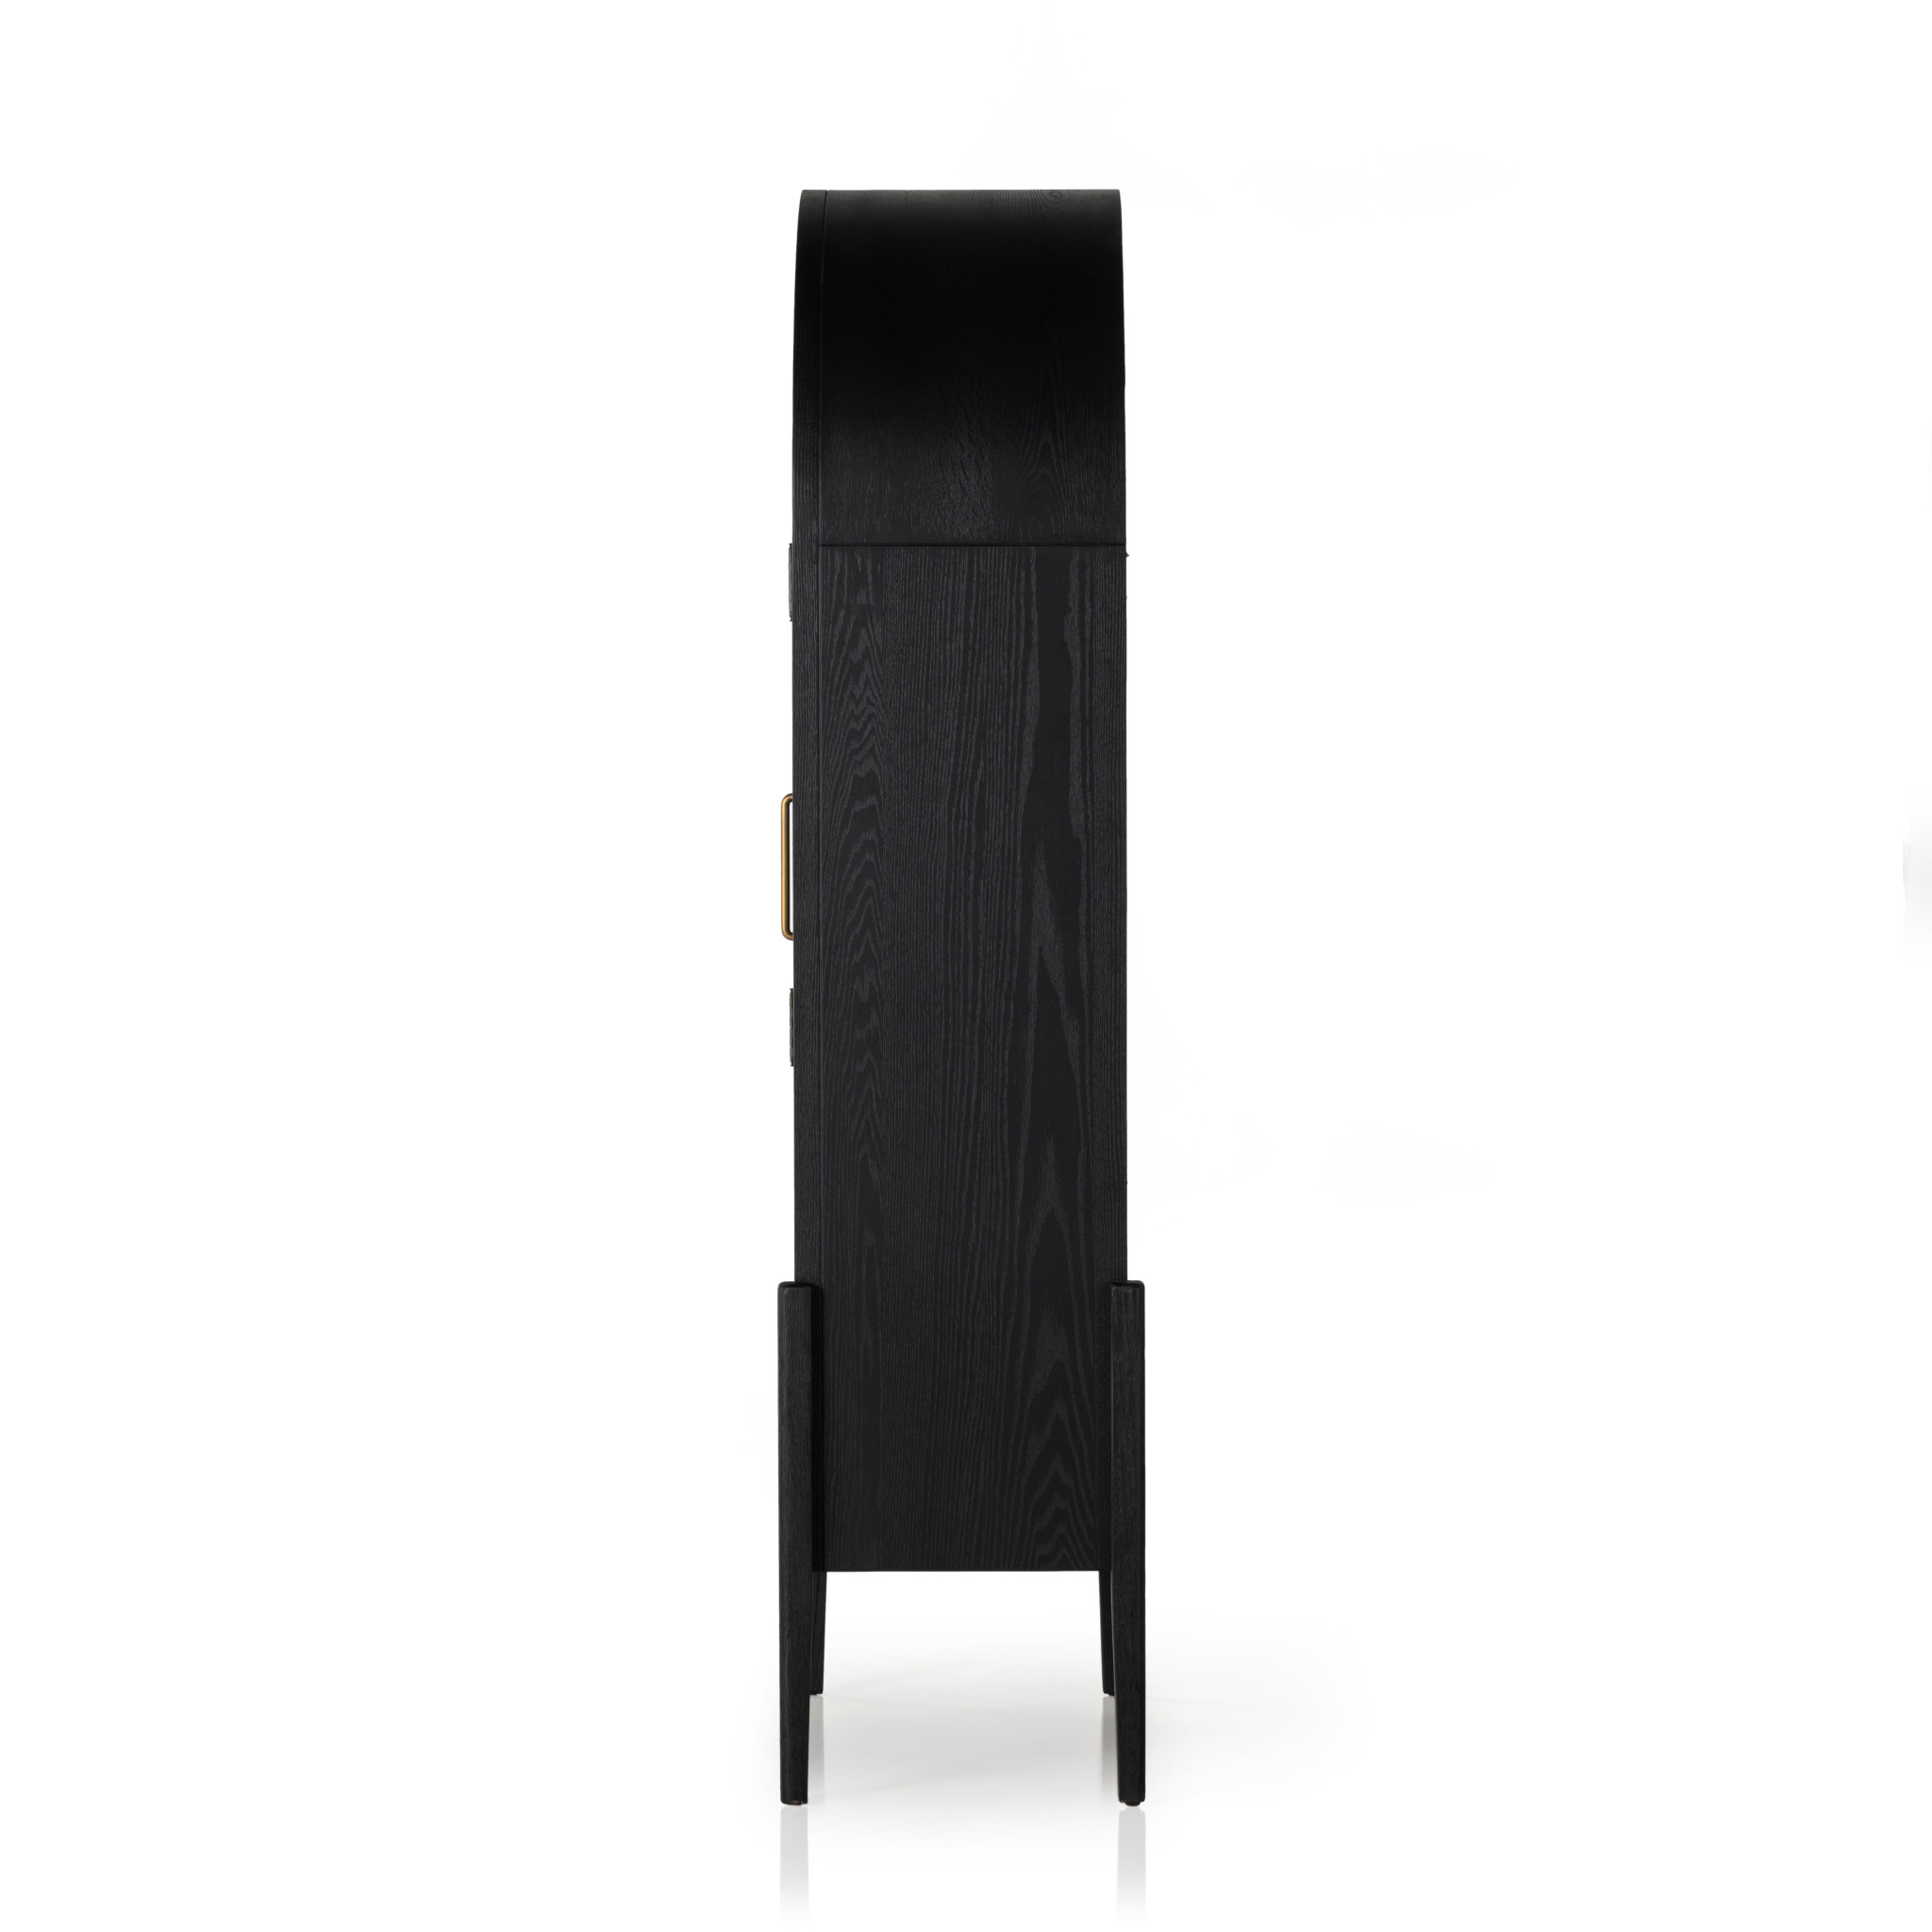 TOLLE CABINET DRIFTED MATTE BLACK